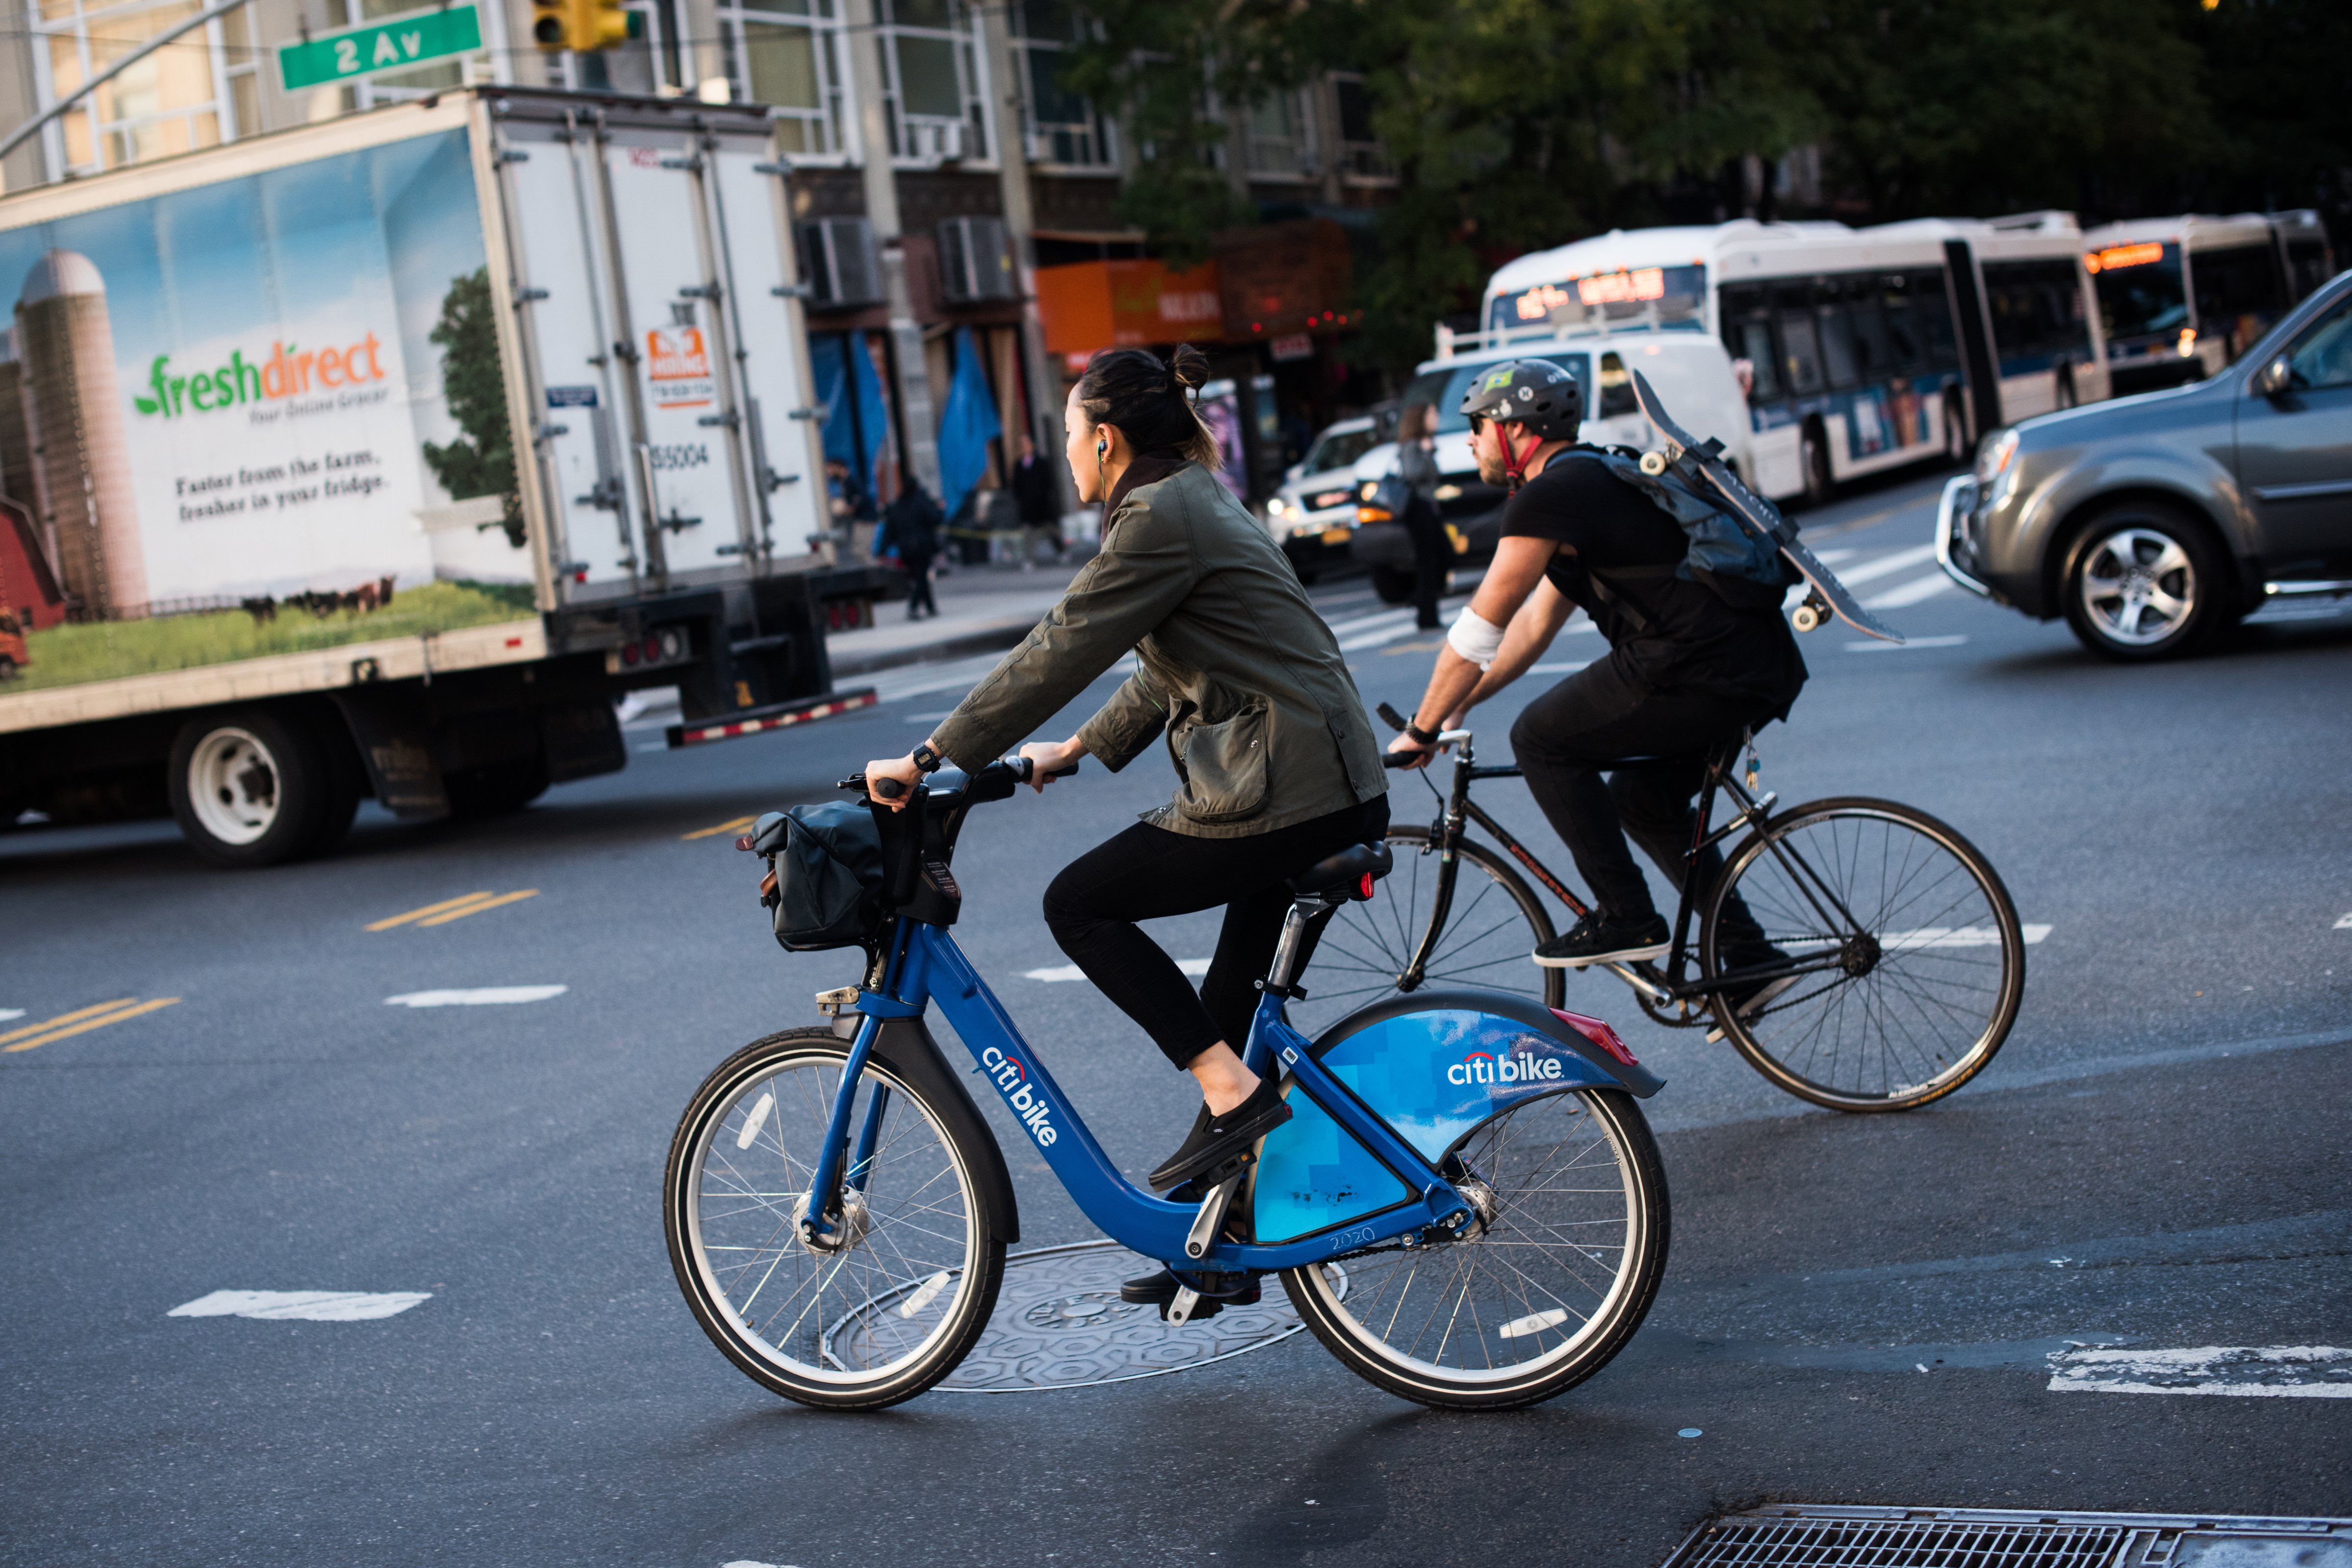 A cyclist rides a Citi Bike in the East Village neighborhood of New York, U.S., on Tuesday, Oct. 11, 2016. (Mark Kauzlarich—Bloomberg via Getty Images)